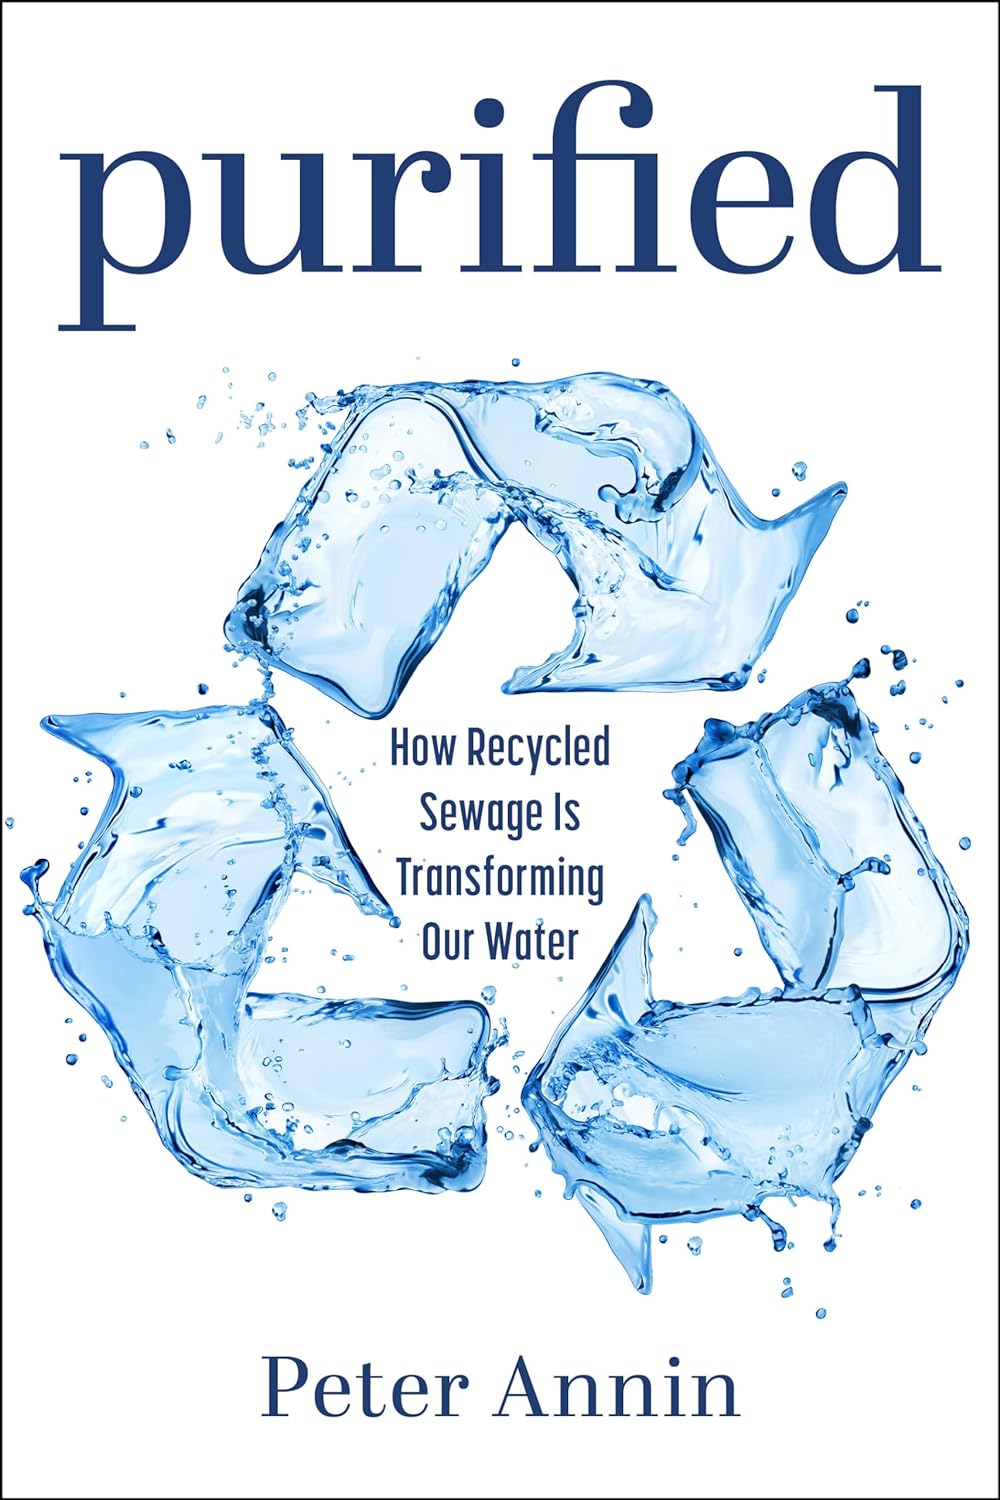 Book cover for “Purified: How Recycled Sewage Is Transforming Our Water"